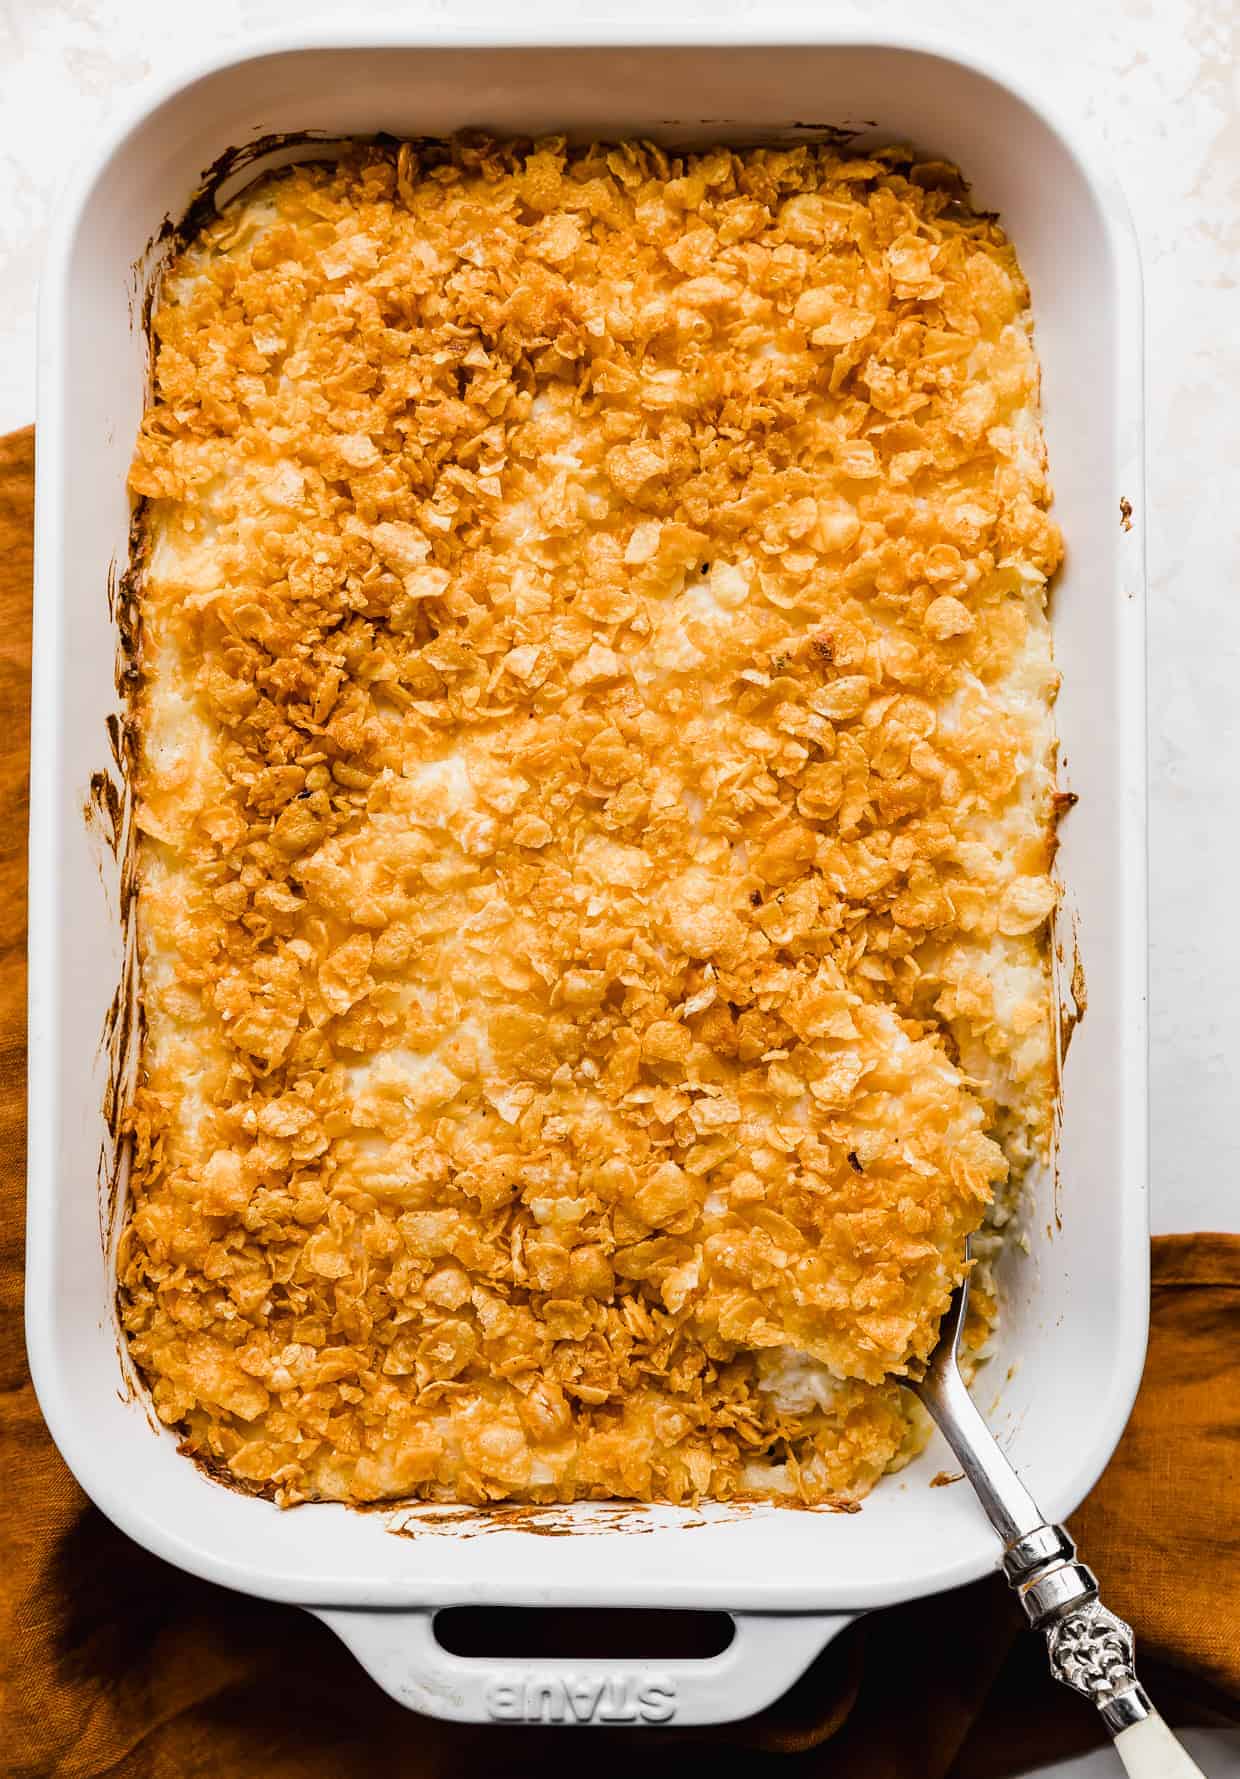 Baked funeral potatoes topped with golden orange cornflakes, with a serving spoon scooping up a helping of potatoes. 